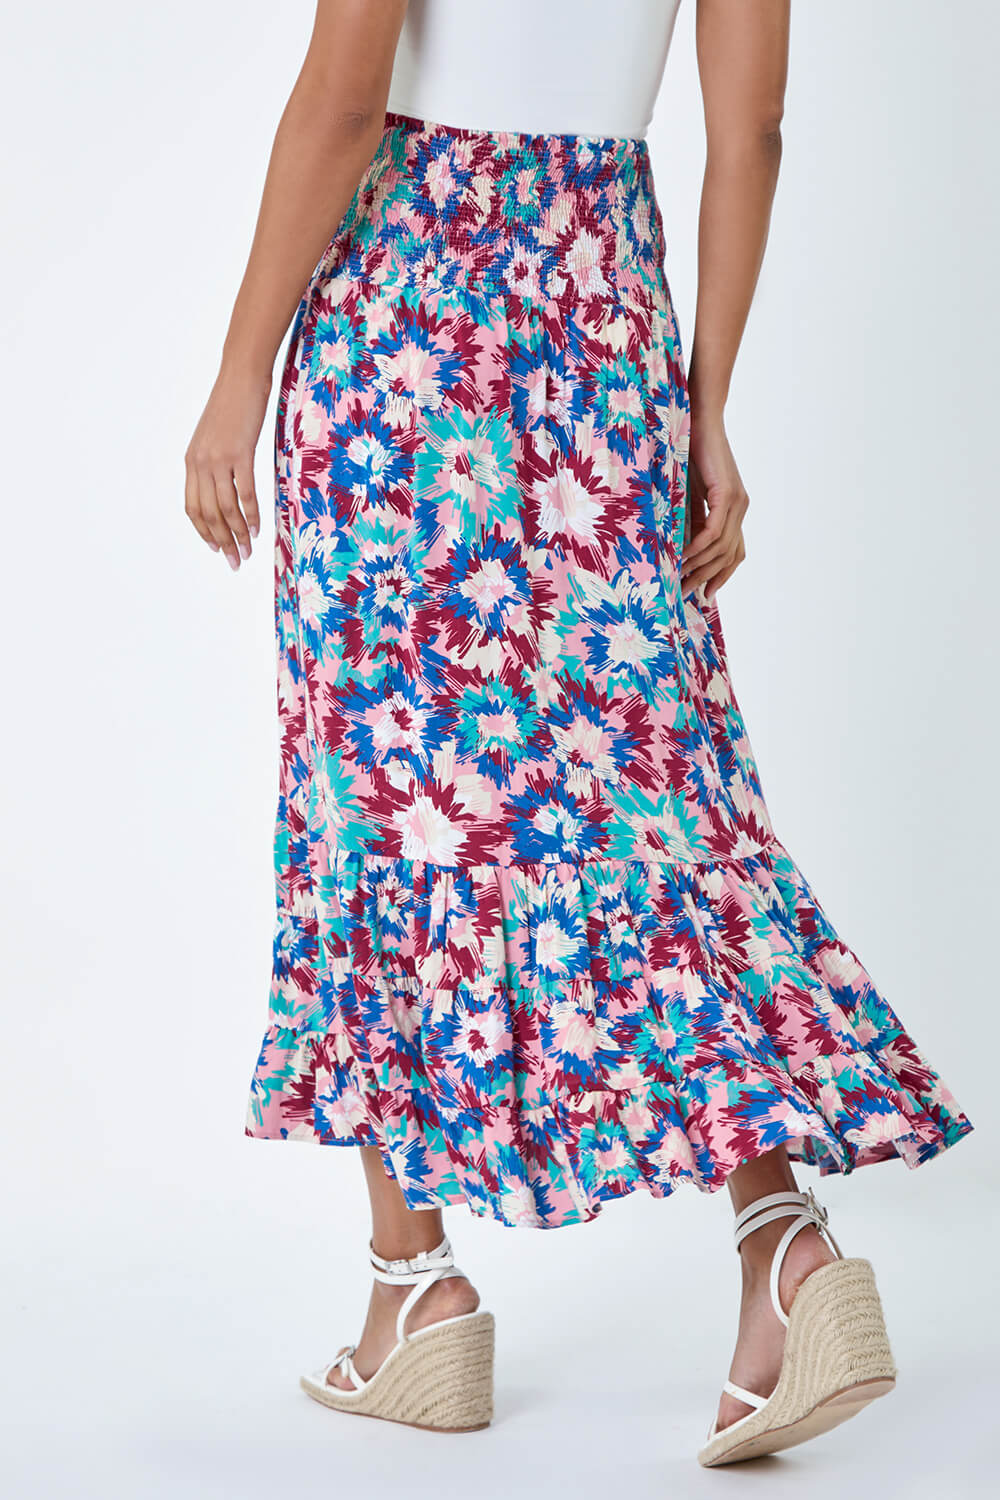 Blue Abstract Print Shirred Multiway Skirt Dress, Image 3 of 6